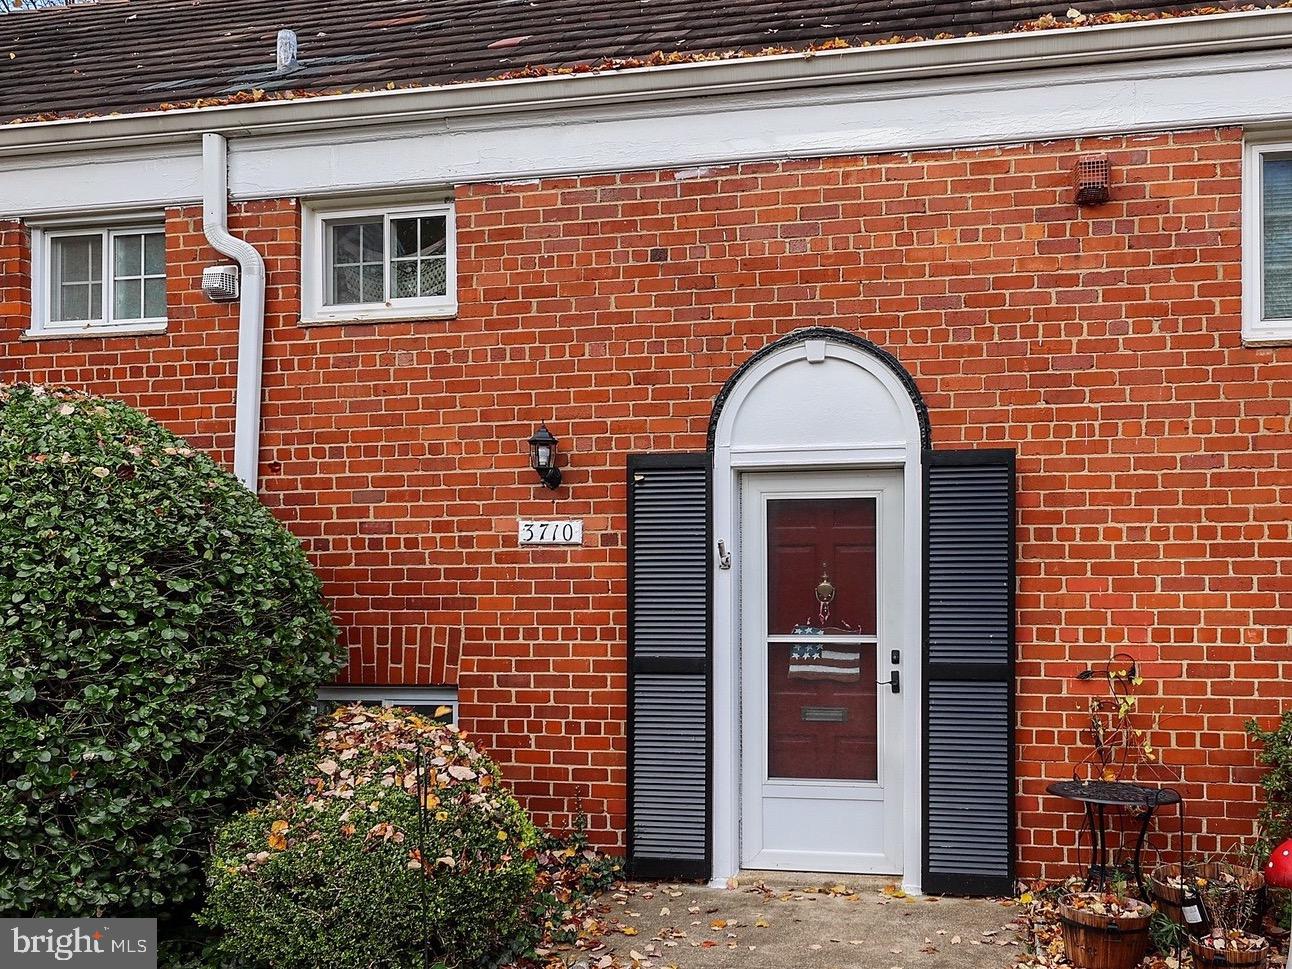 a view of a brick house with a large door